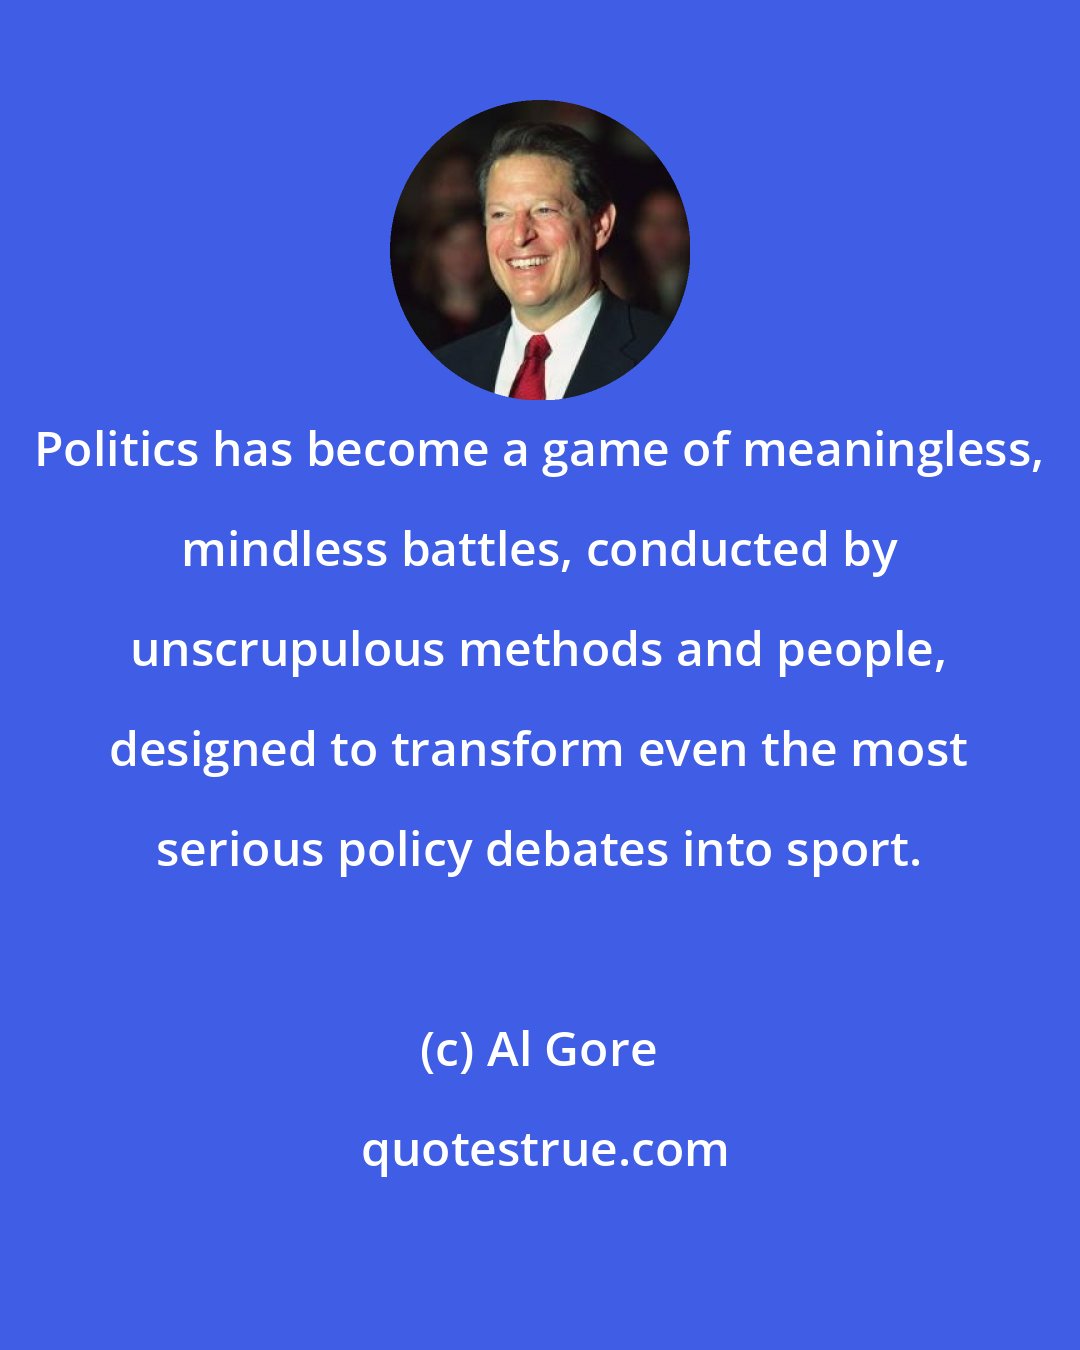 Al Gore: Politics has become a game of meaningless, mindless battles, conducted by unscrupulous methods and people, designed to transform even the most serious policy debates into sport.